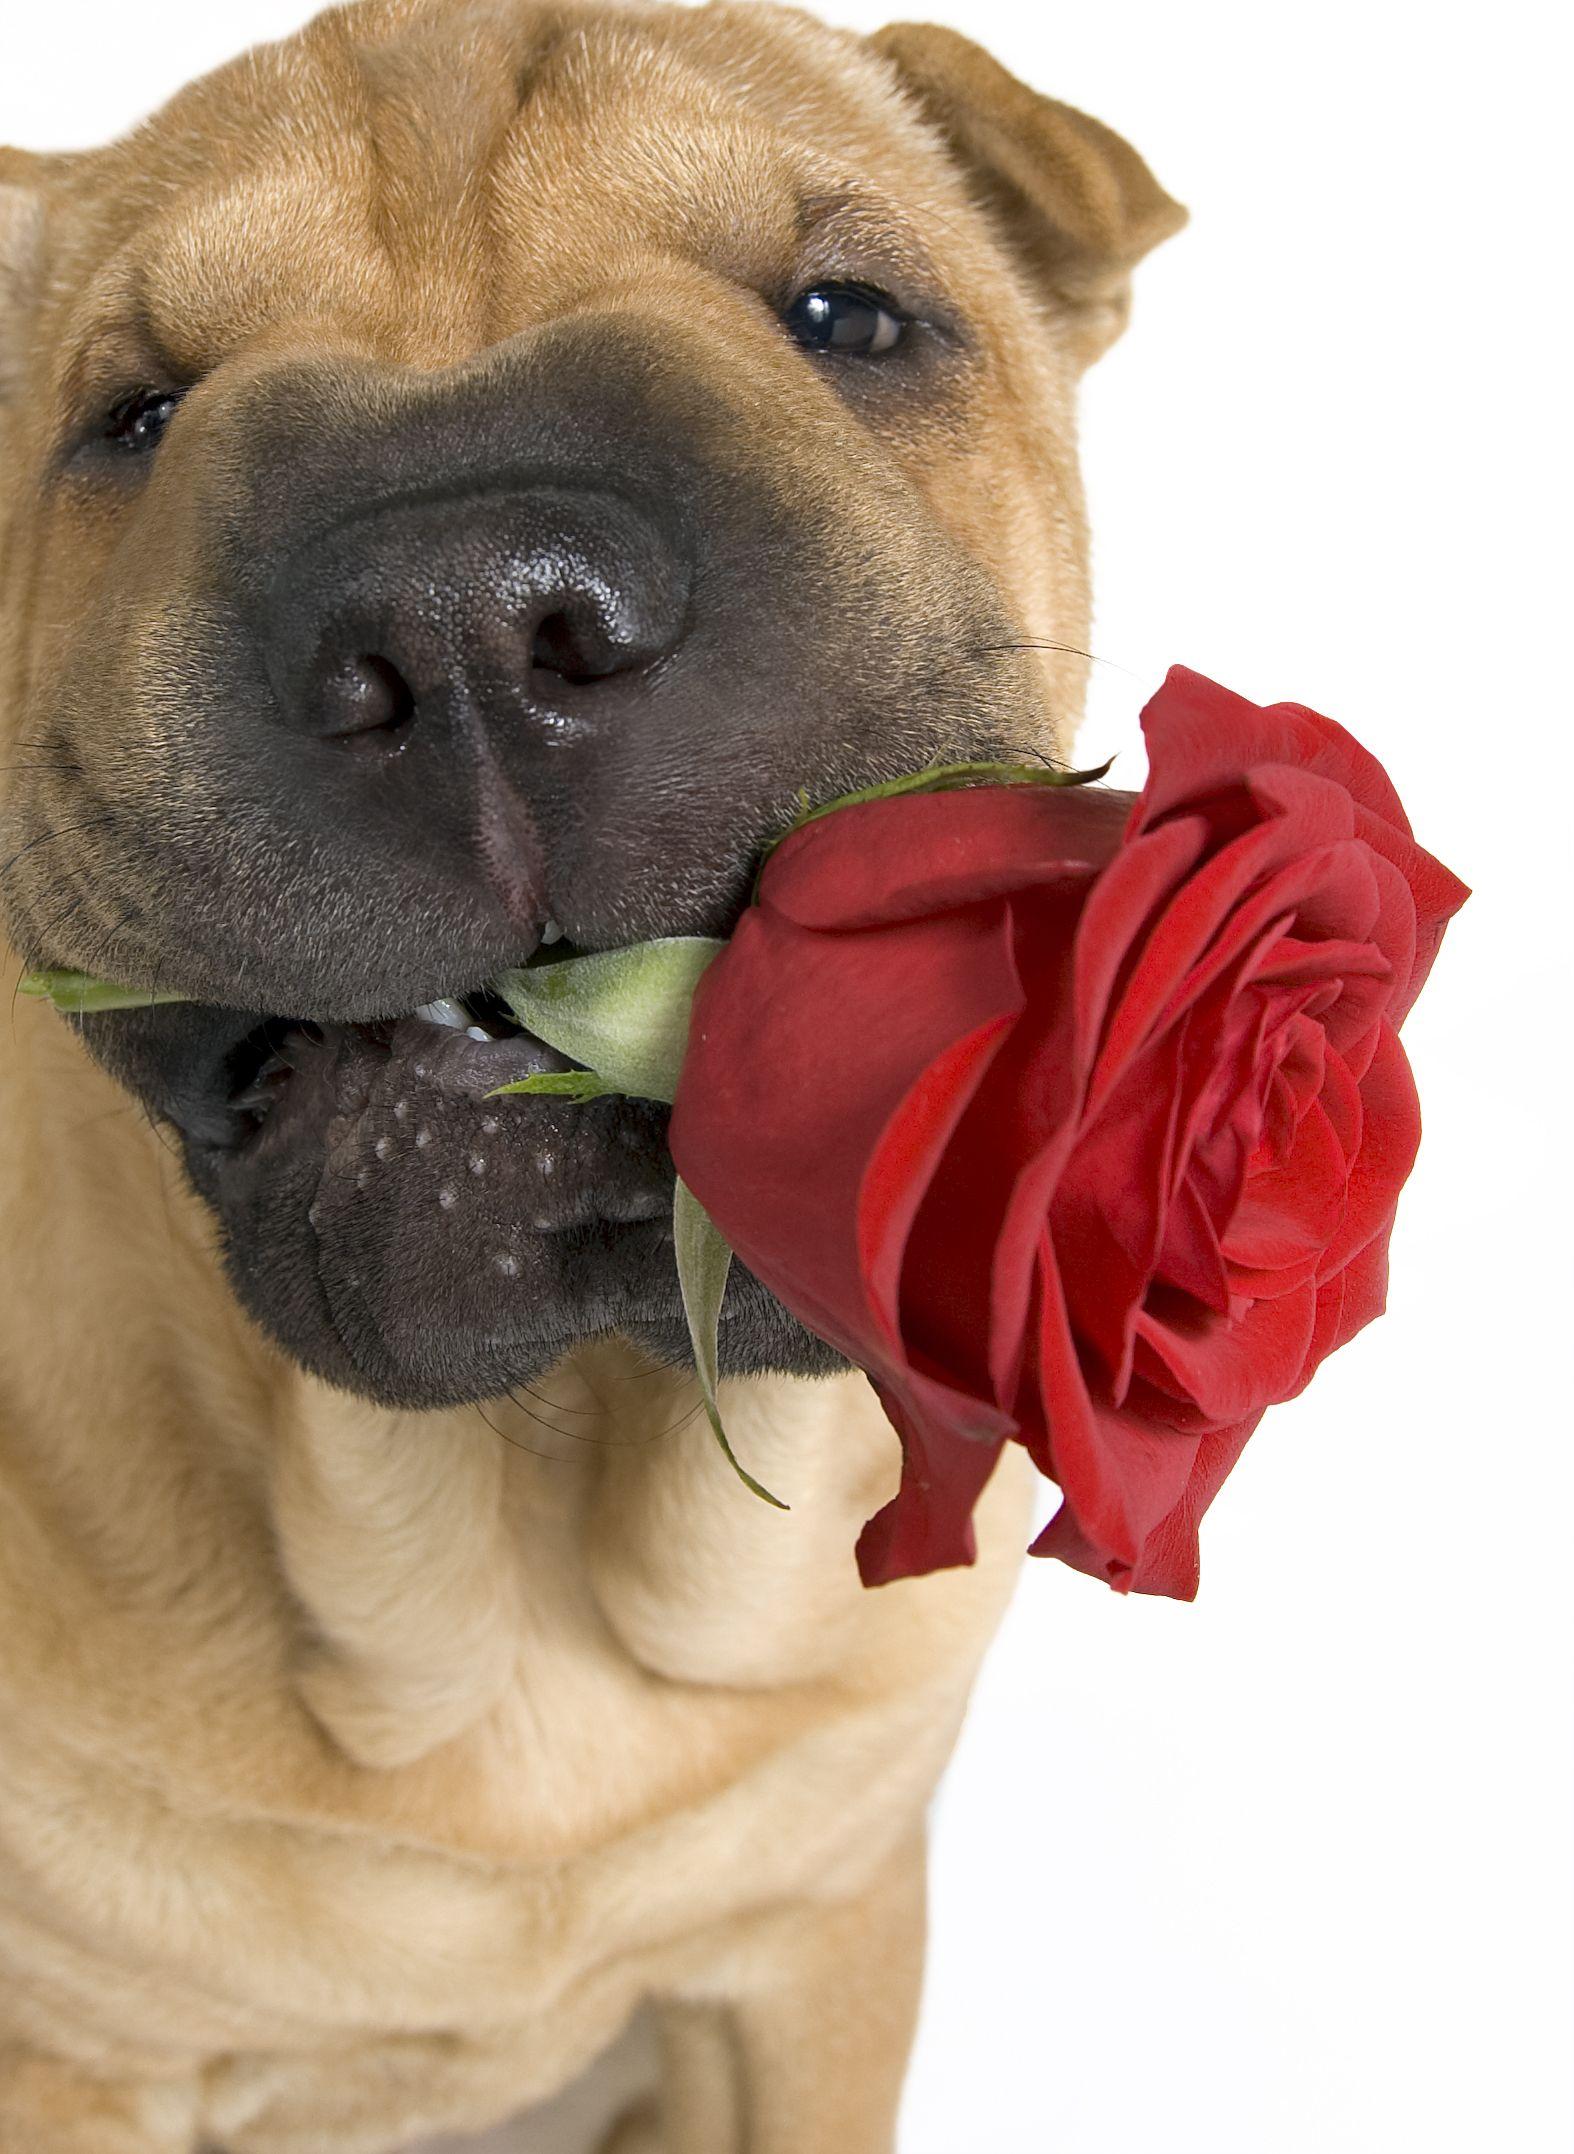 St. Valentine's Day dogs wallpaper. Download cute dog